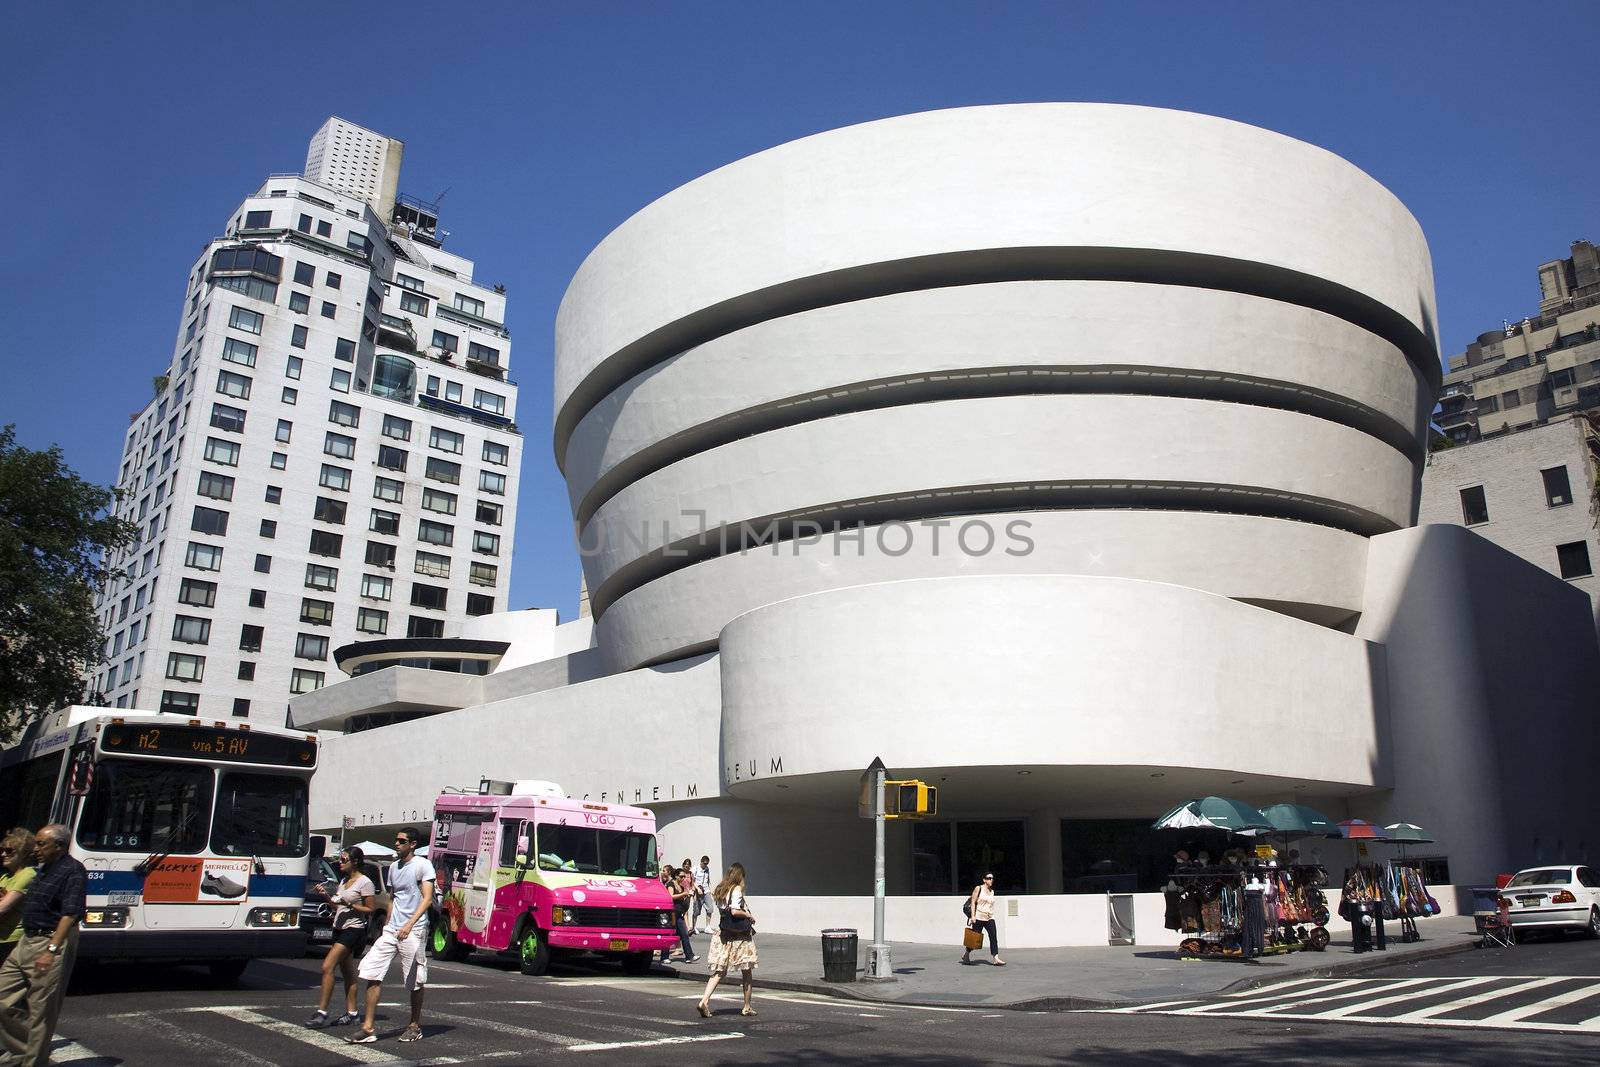 NEW YORK - JUNE 1, 2011: The Solomon R. Guggenheim Museum of modern and contemporary art. Designed by Frank Lloyd Wright museum opened on October 21,1959. On June 1, 2011 in New York City, USA